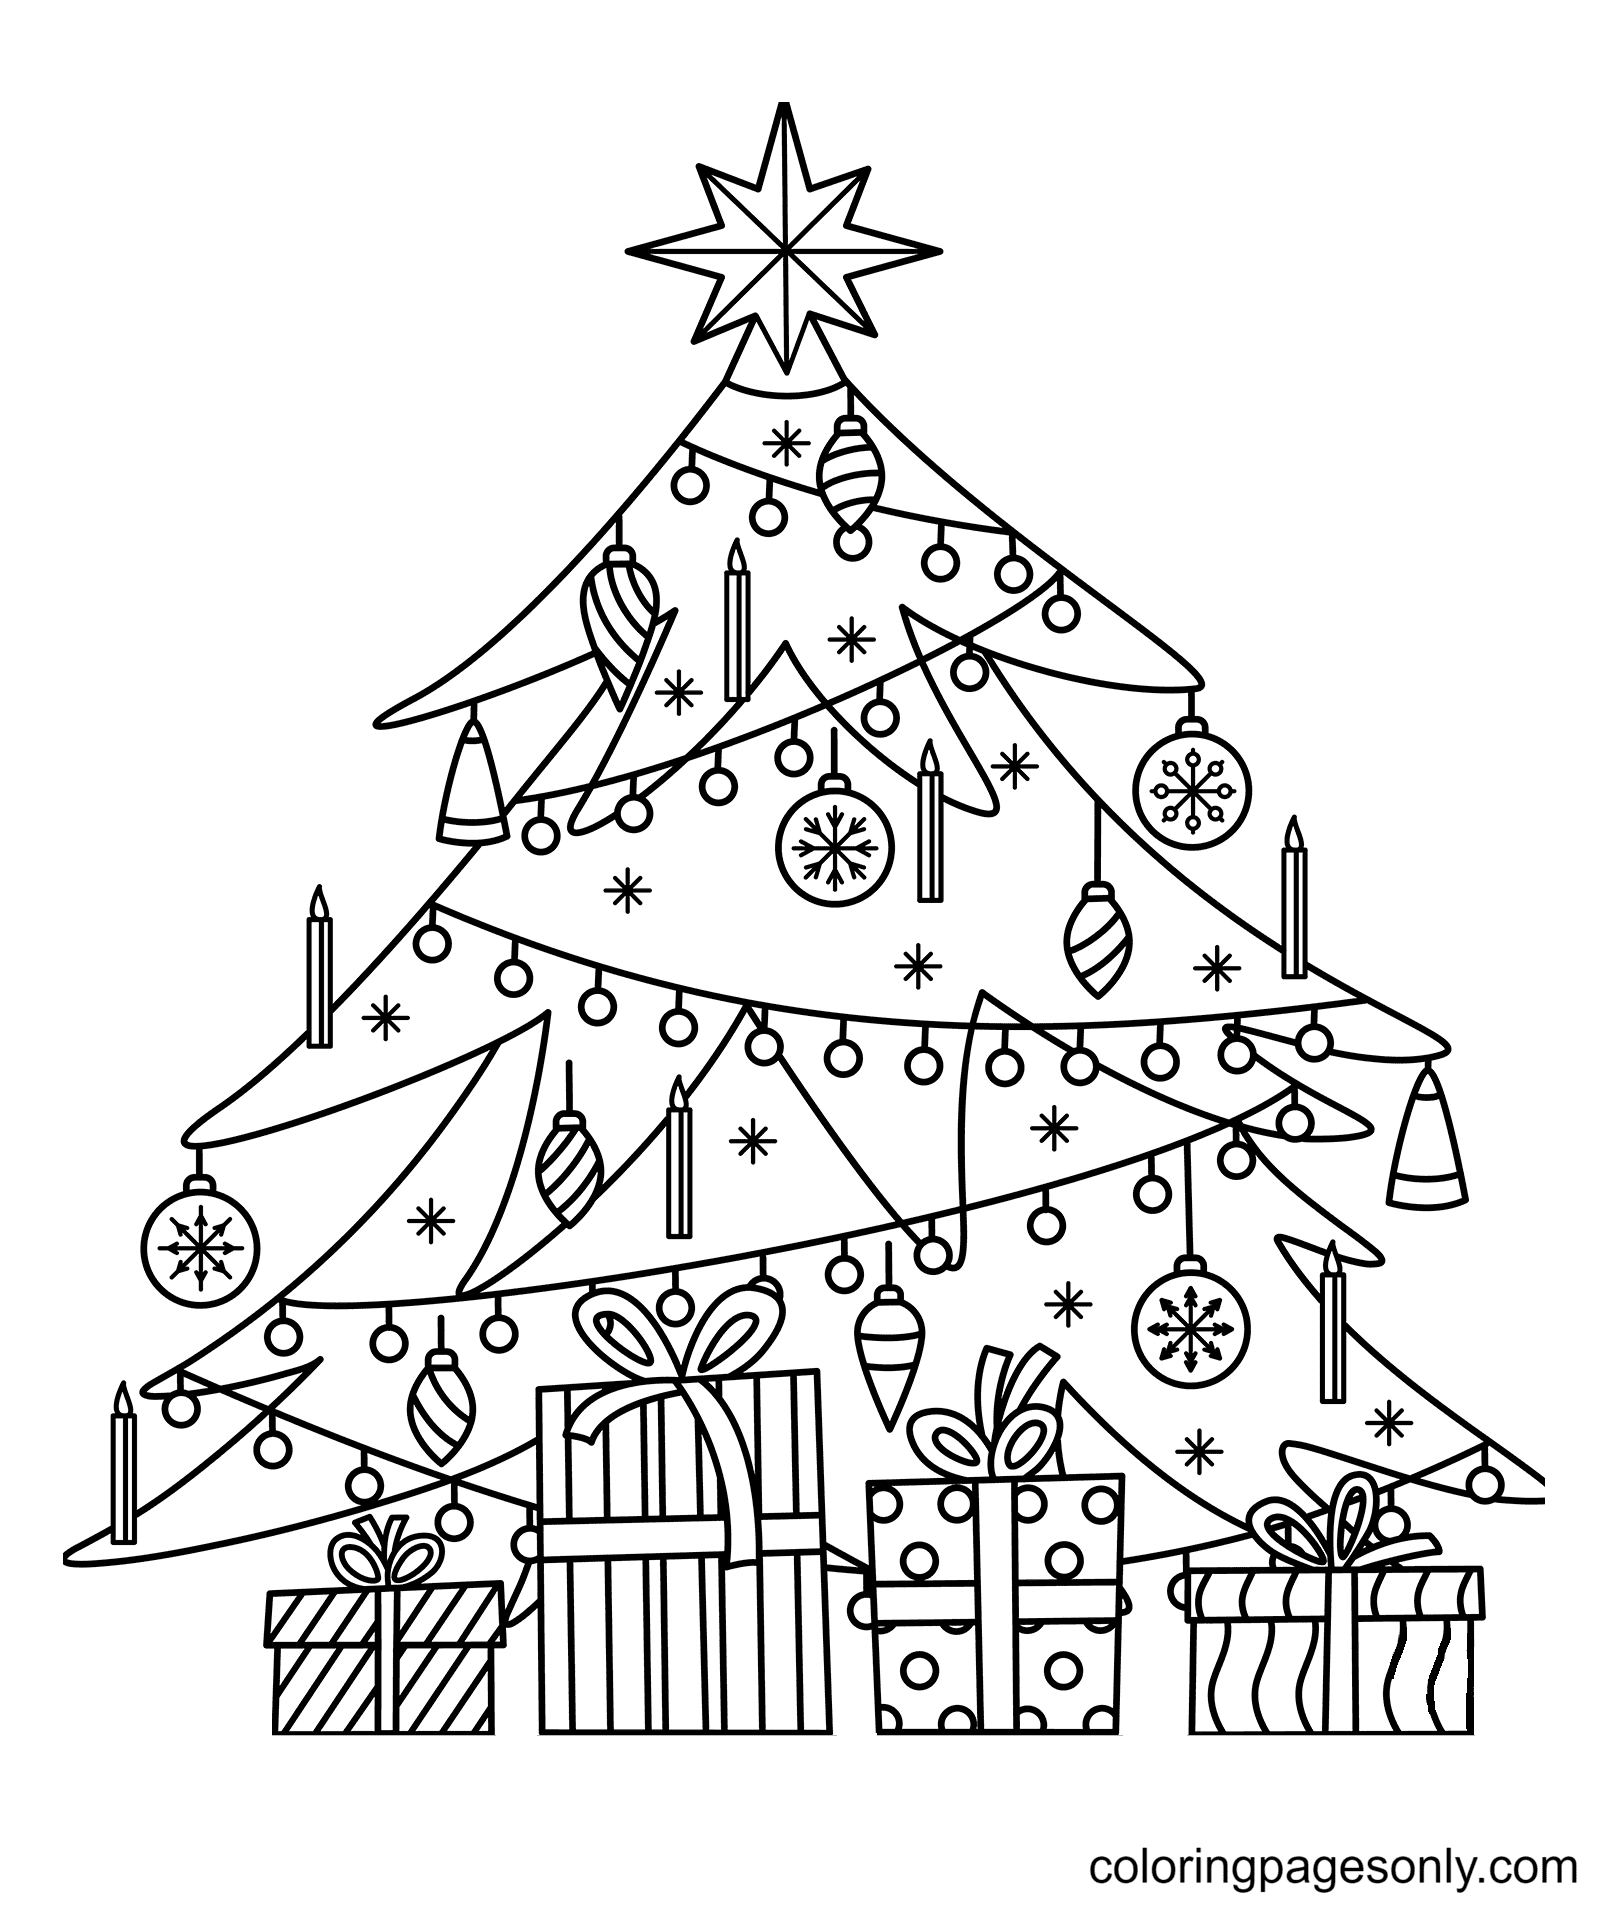 printable-christmas-tree-coloring-page-free-printable-coloring-pages